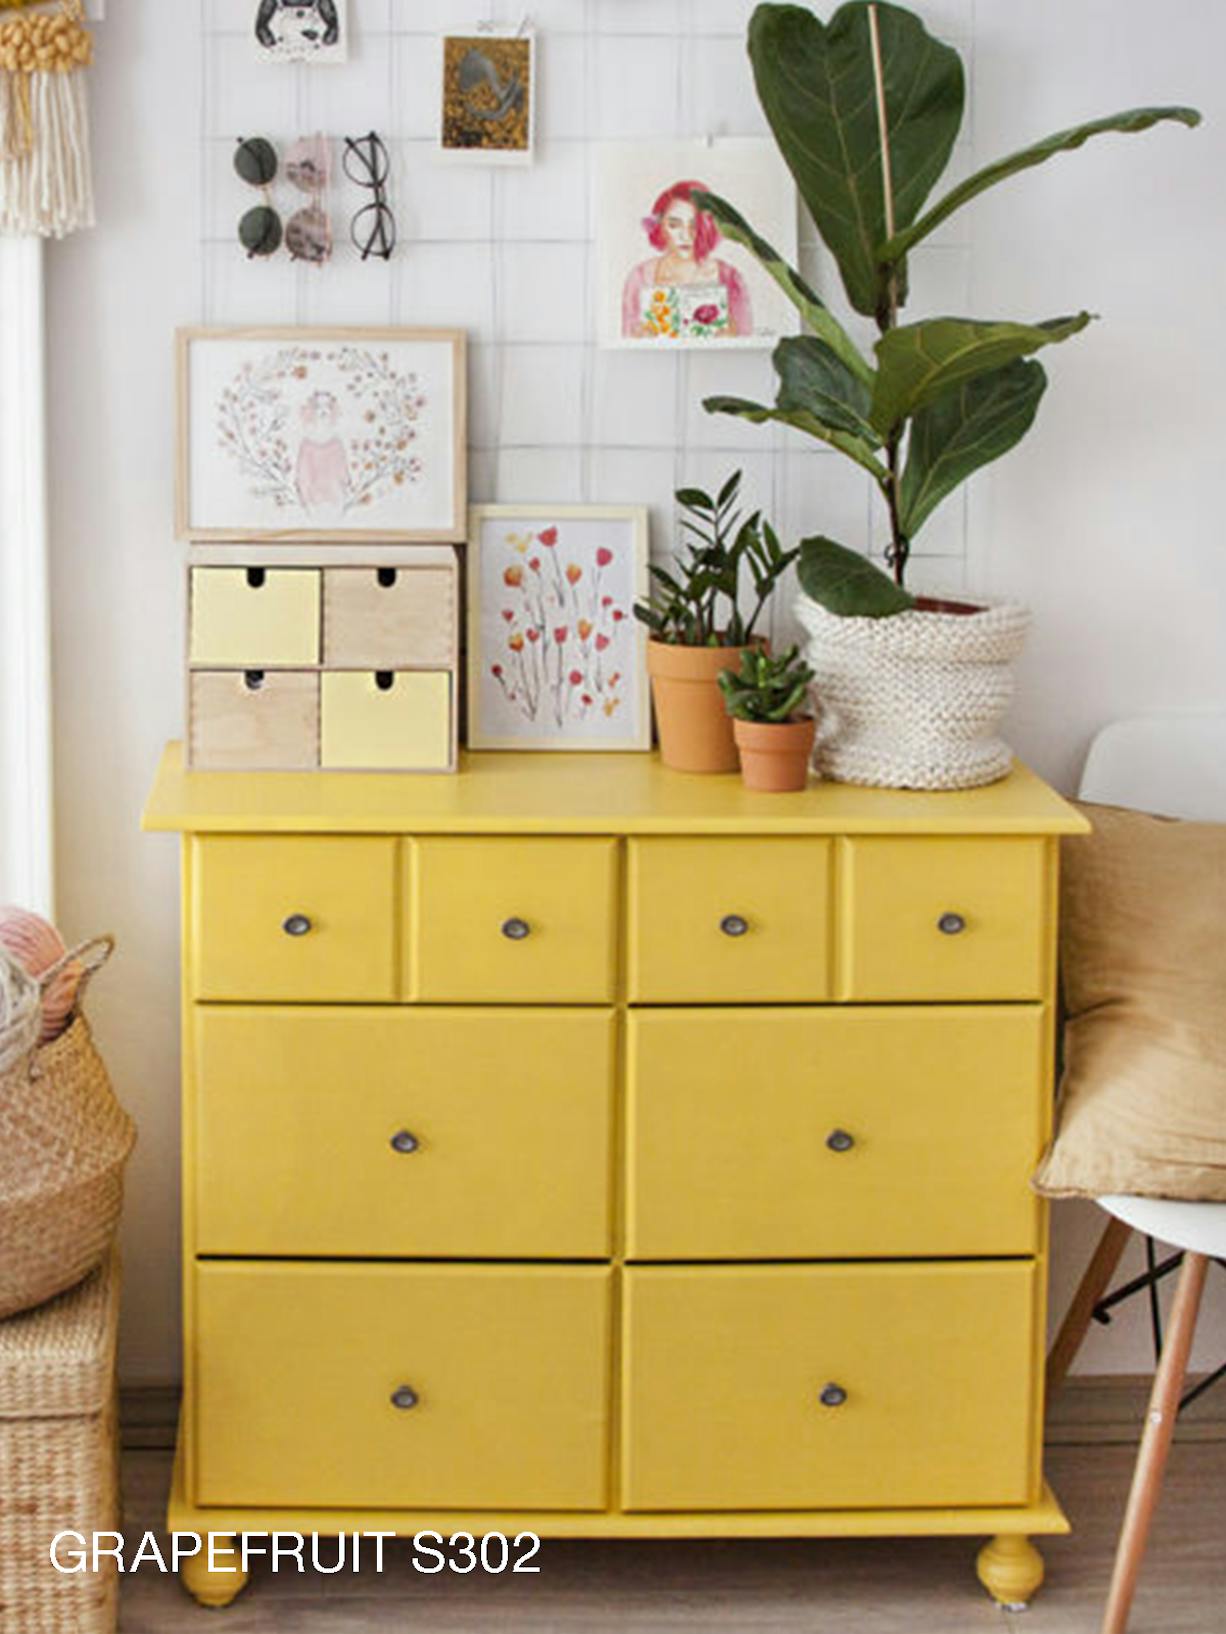 Yellow chest of drawers